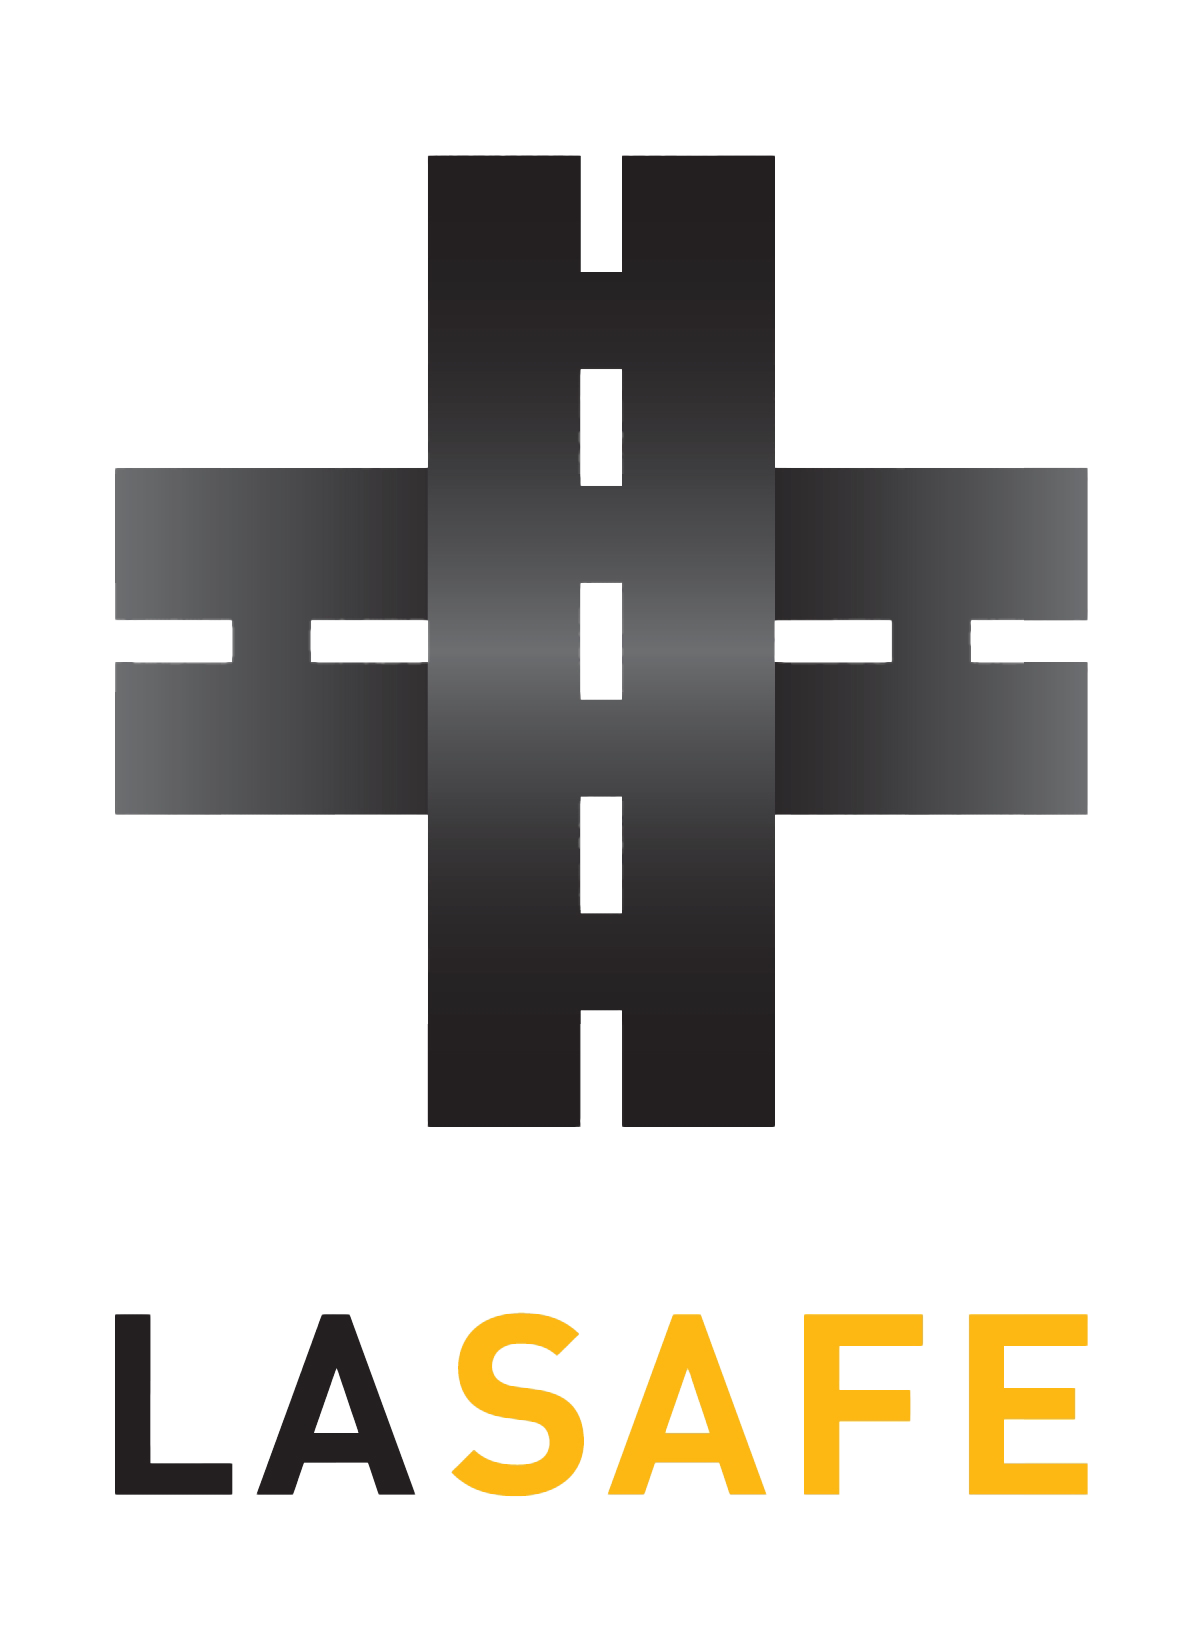 Los Angeles County Service Authority for Freeway Emergencies